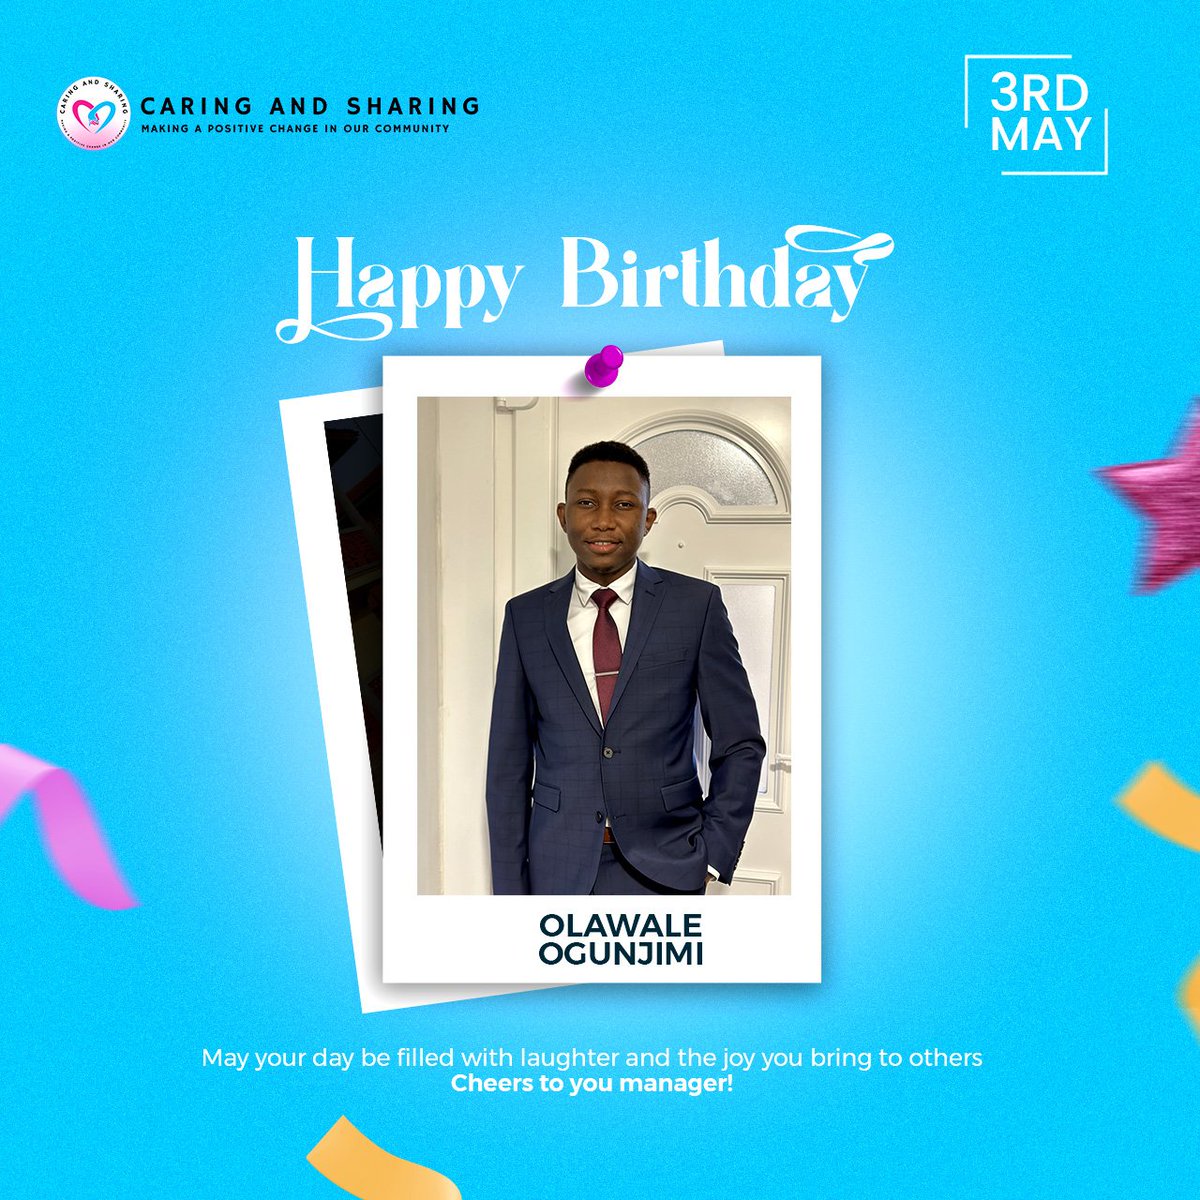 Happy Birthday Jim.! Having you as our operations manager is one of the best things that has happened to us as an organisation. May your day be filled with laughter and the joy you bring to others. Here's to another year of making the world a better place. Cheers to you!